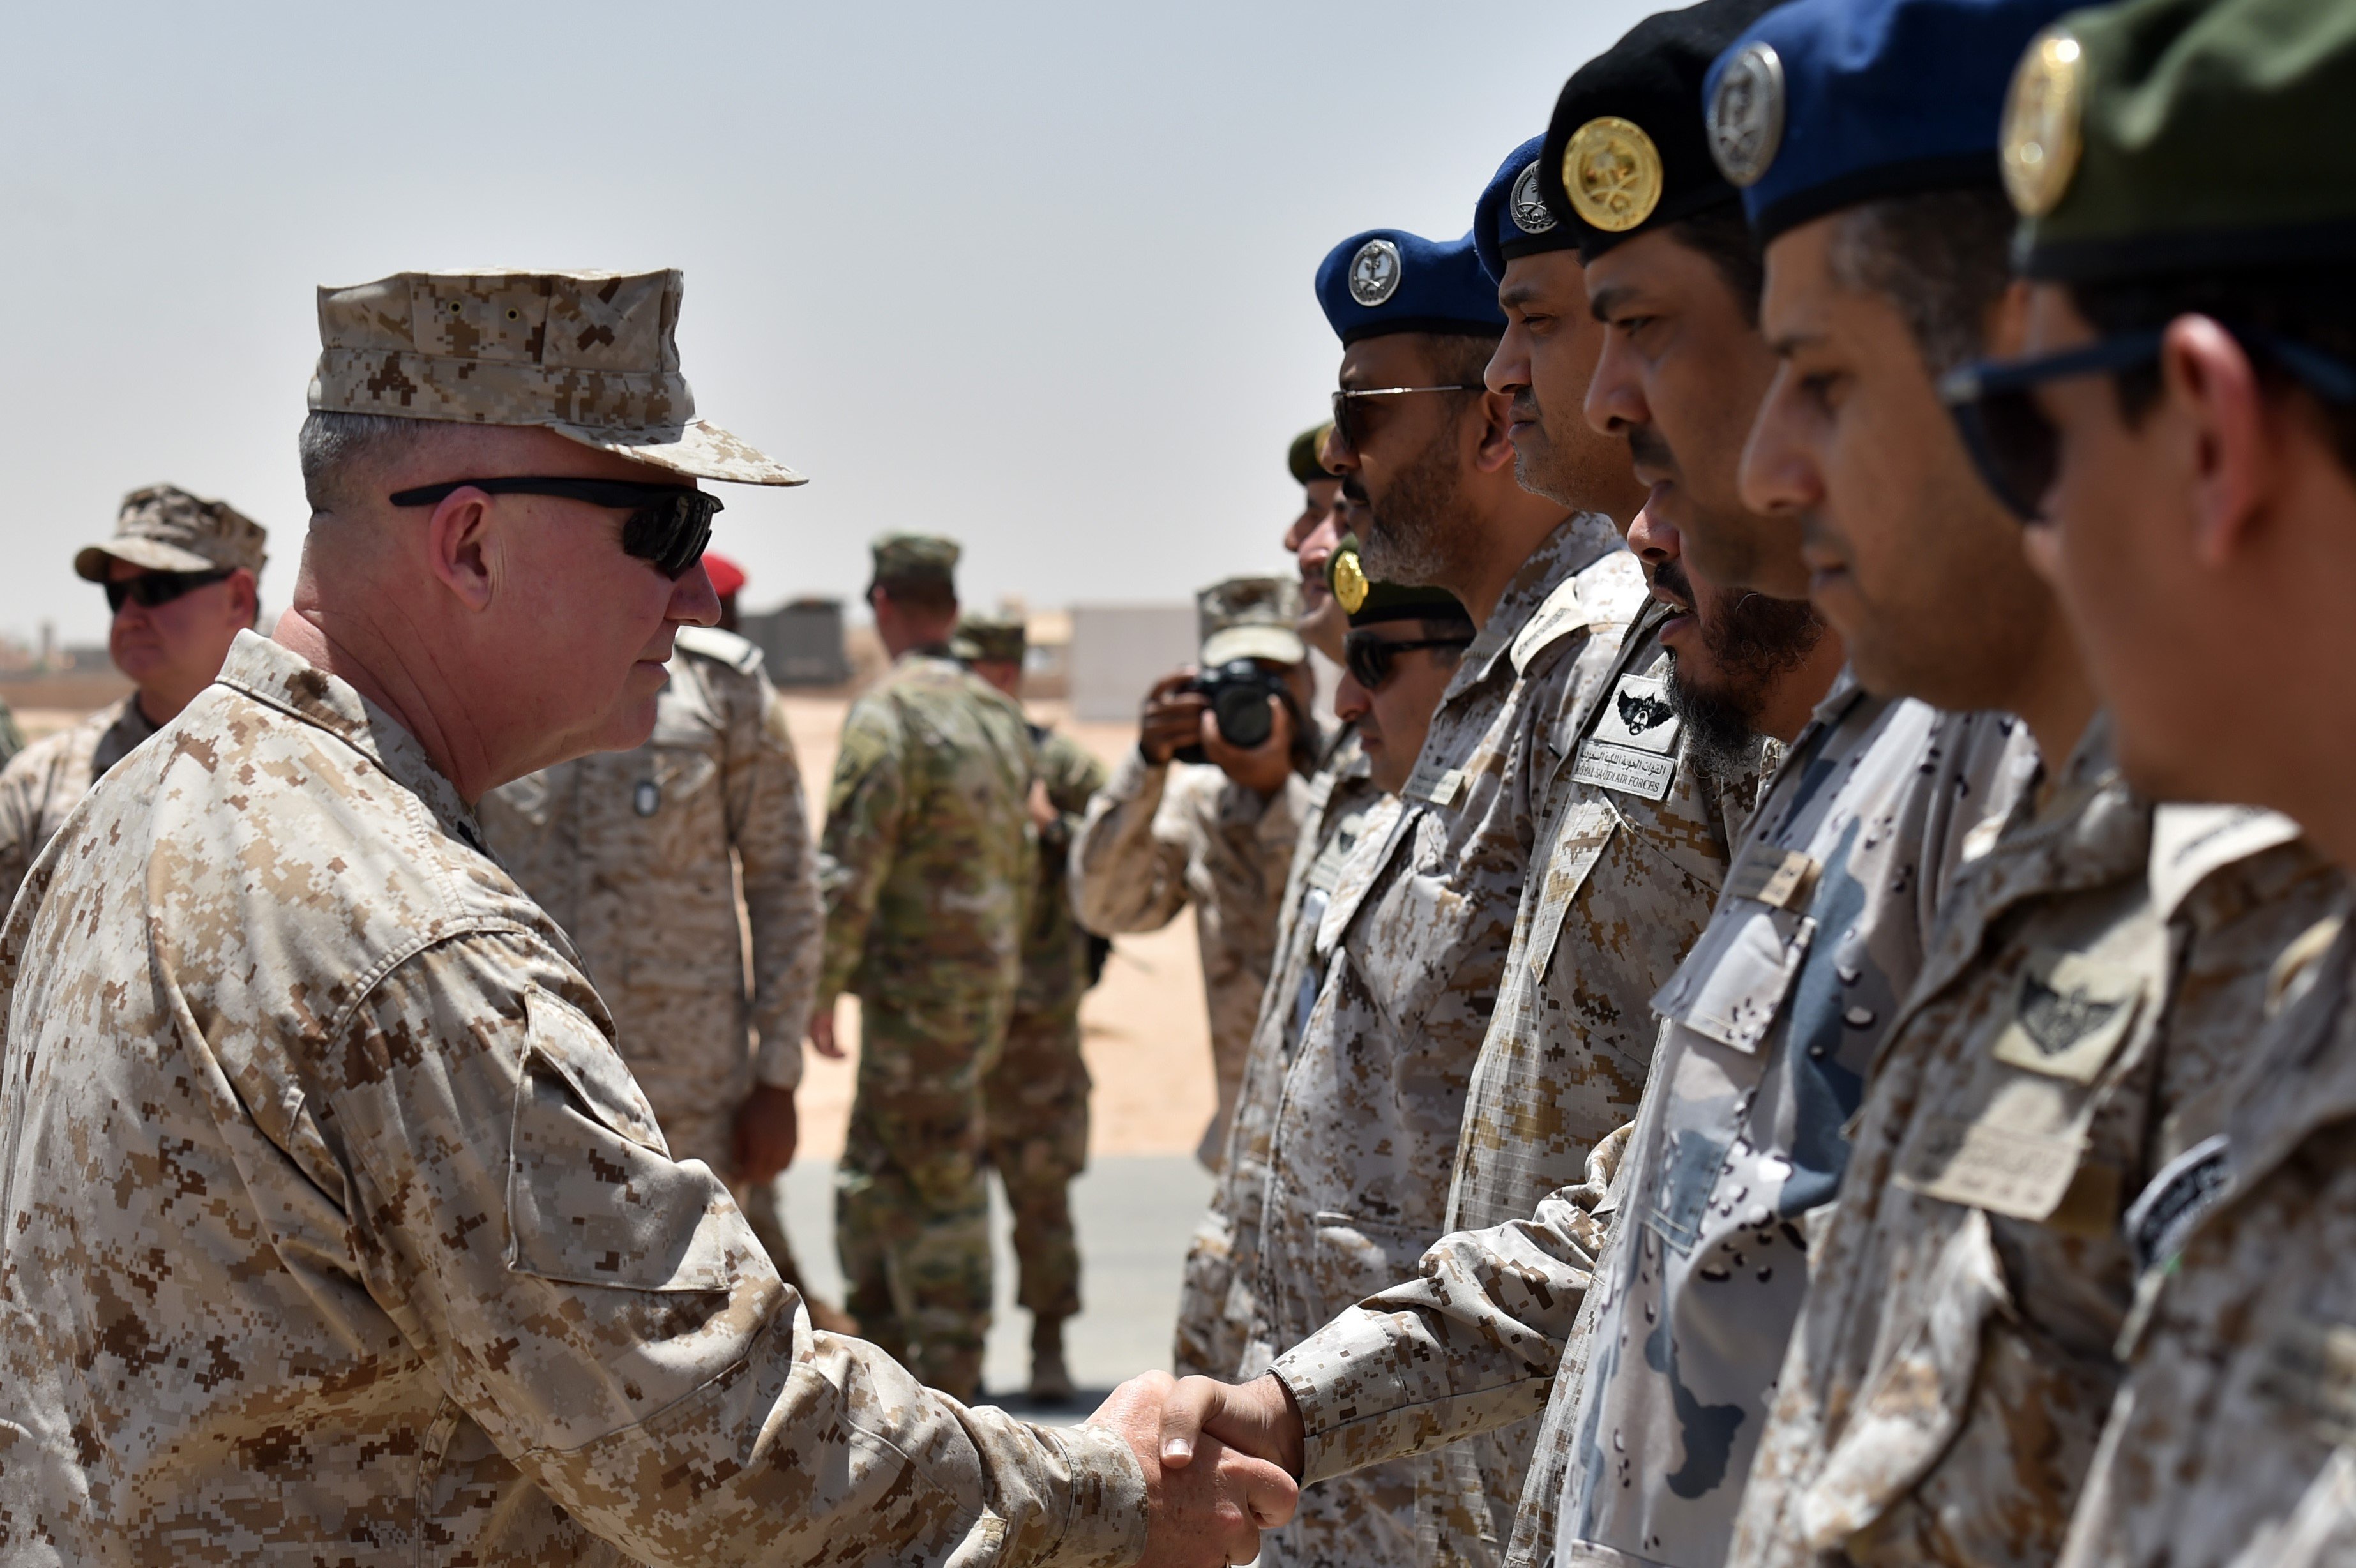 US Marine Corps General Kenneth F. McKenzie Jr. (L), Commander of the US Central Command (CENTCOM), shakes hands with Saudi military officers during his visit to a military base in al-Kharj in central Saudi Arabia on July 18, 2019.